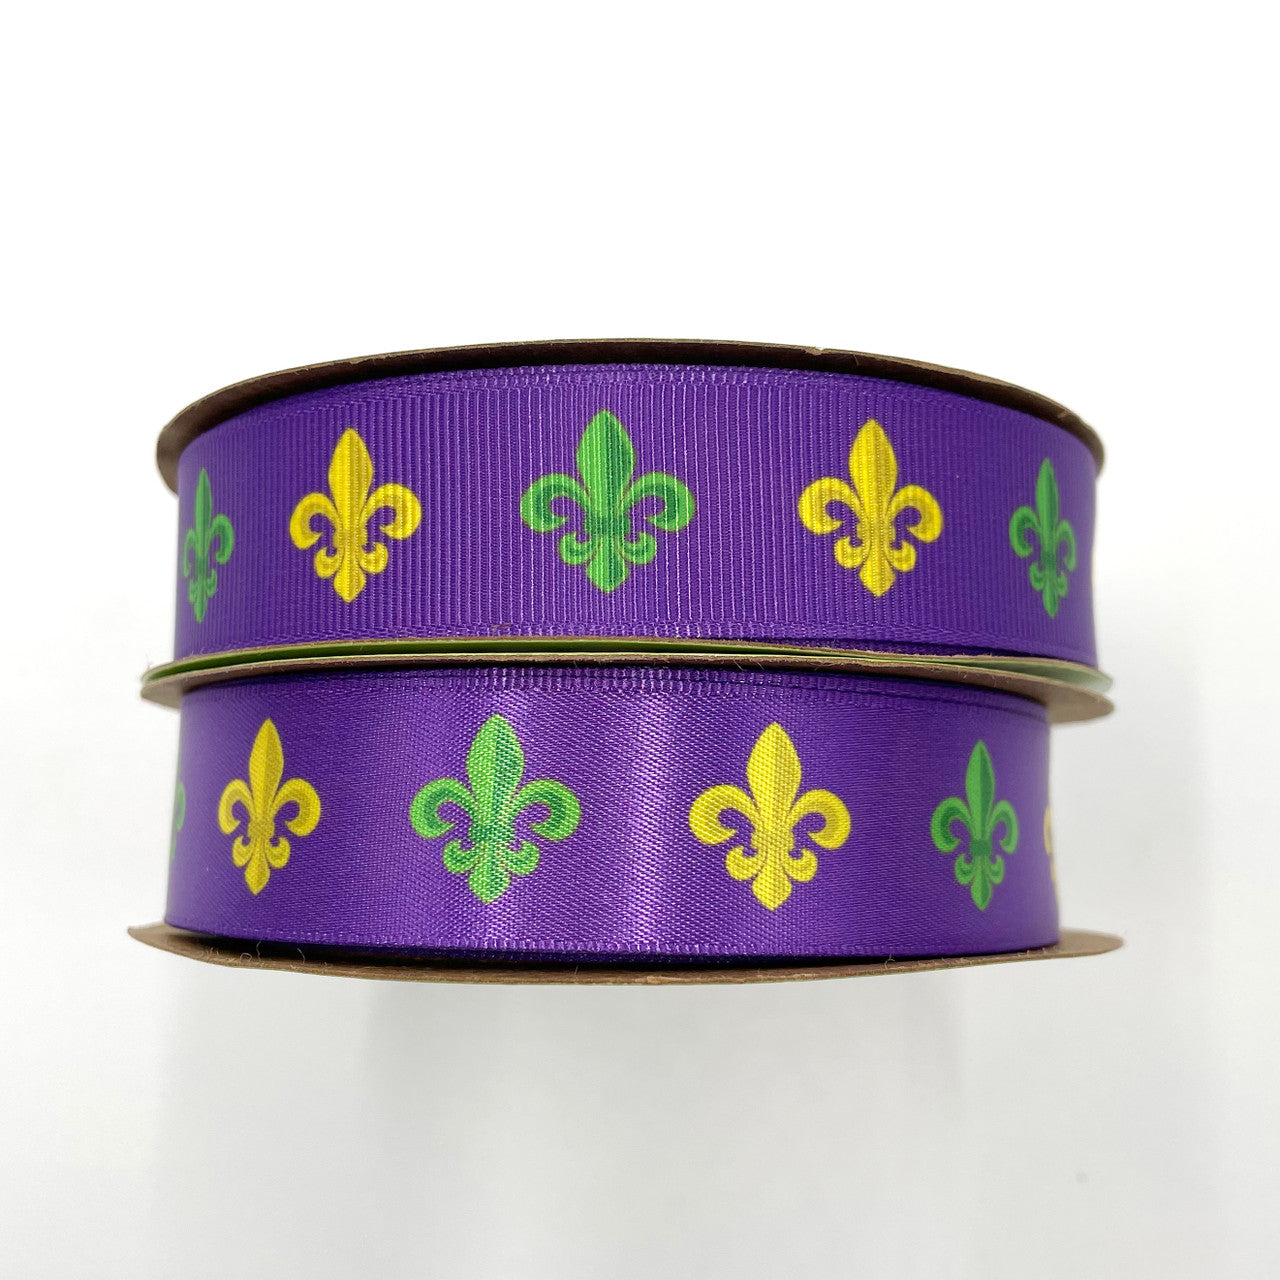 Our beautiful Mardi Gras themed fleur de lis ribbon is available in 7/8" satin and grosgrain ribbons.